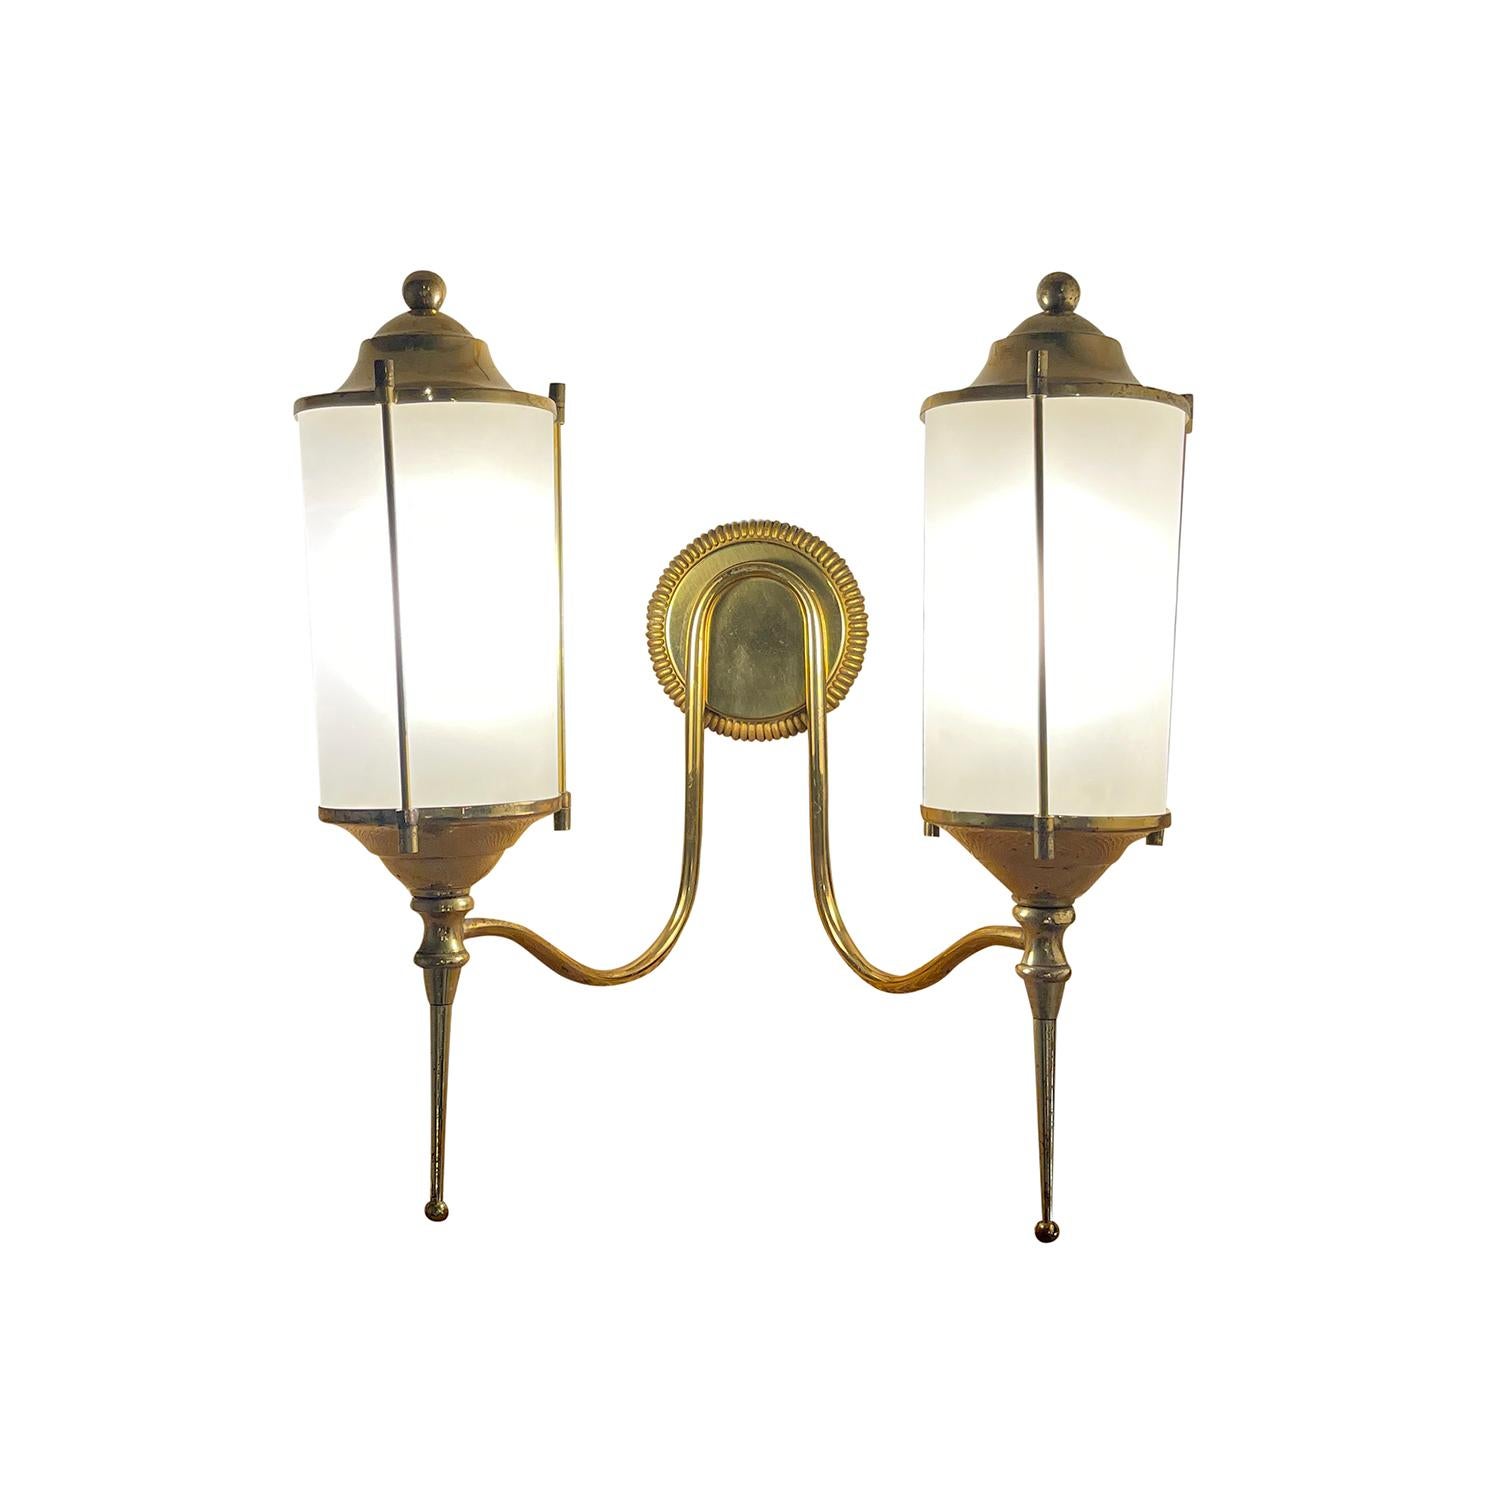 20th Century Set of Three Double Light Appliqués, Italian Brass Wall Sconces In Good Condition For Sale In West Palm Beach, FL